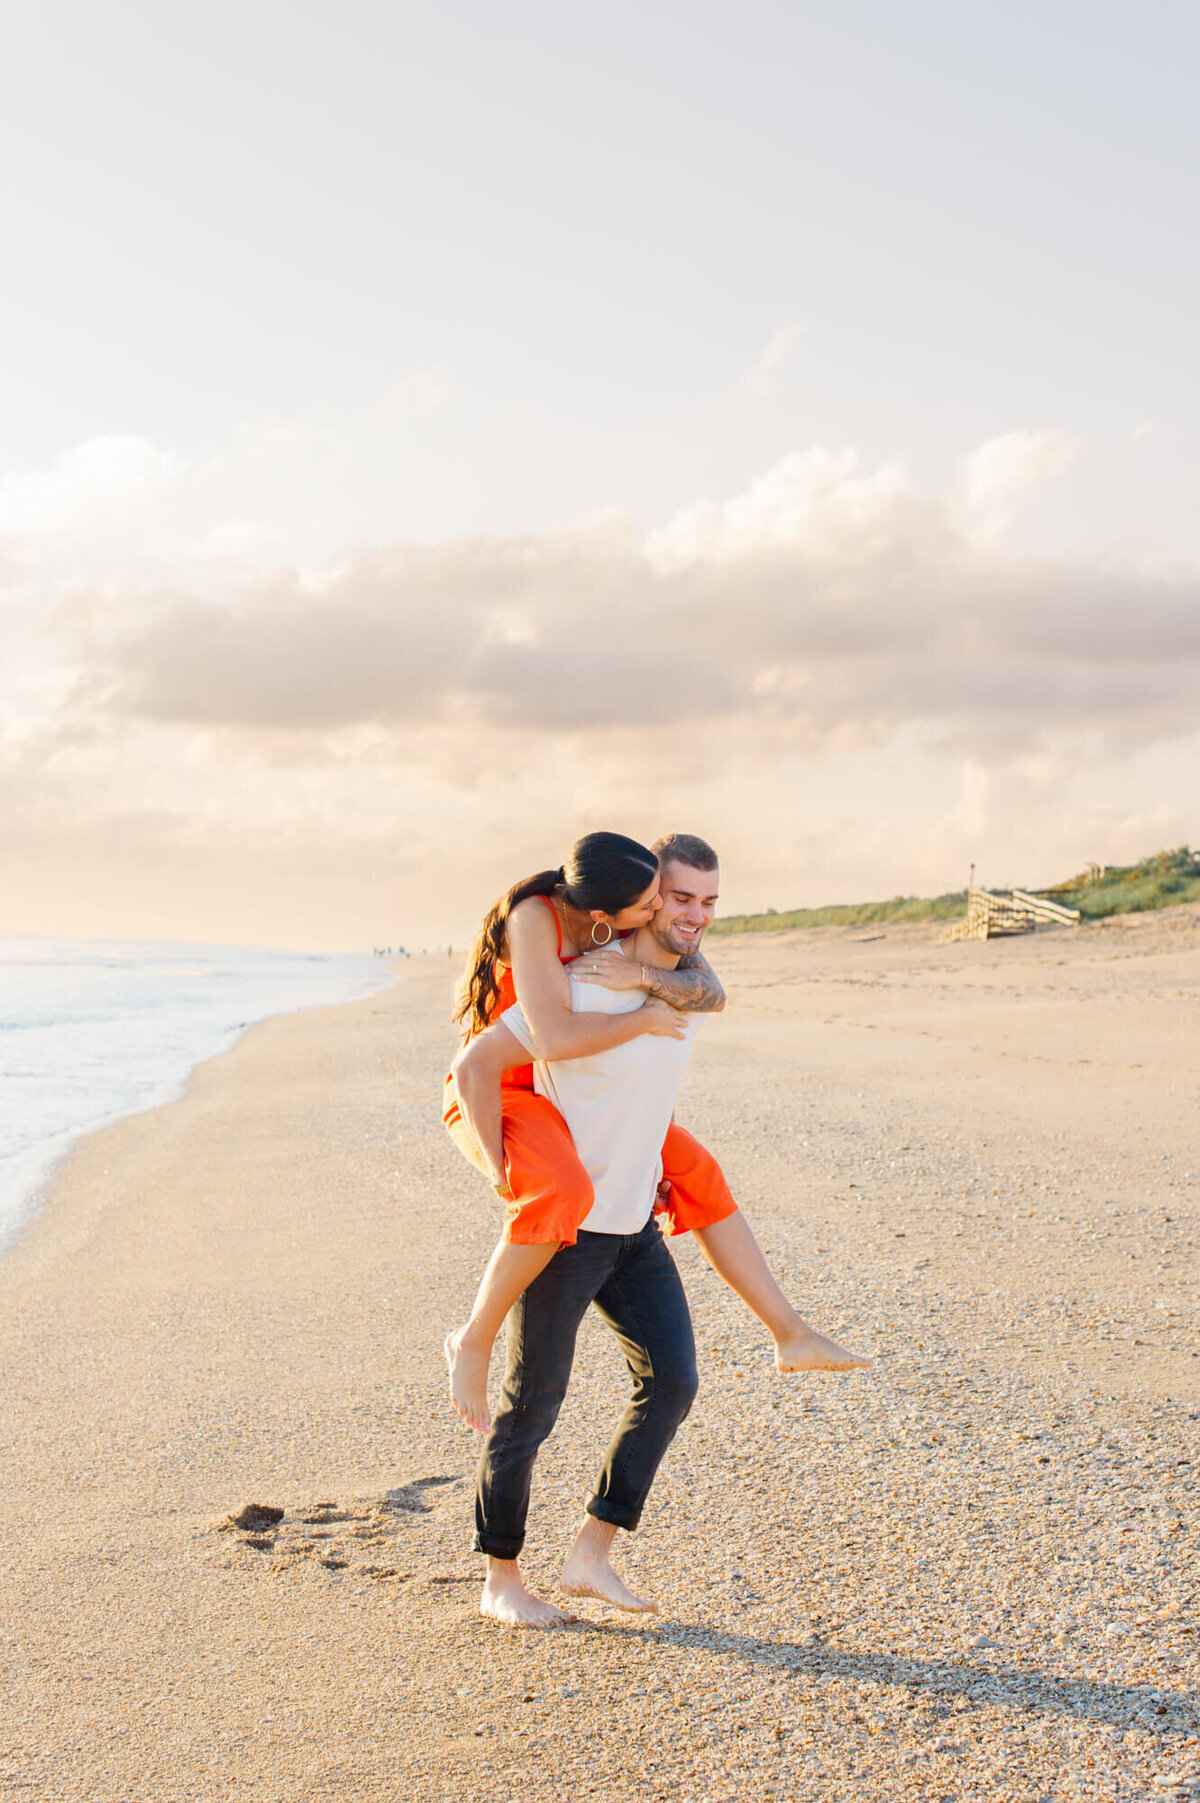 Couple smiling and laughing on the beach while riding piggyback